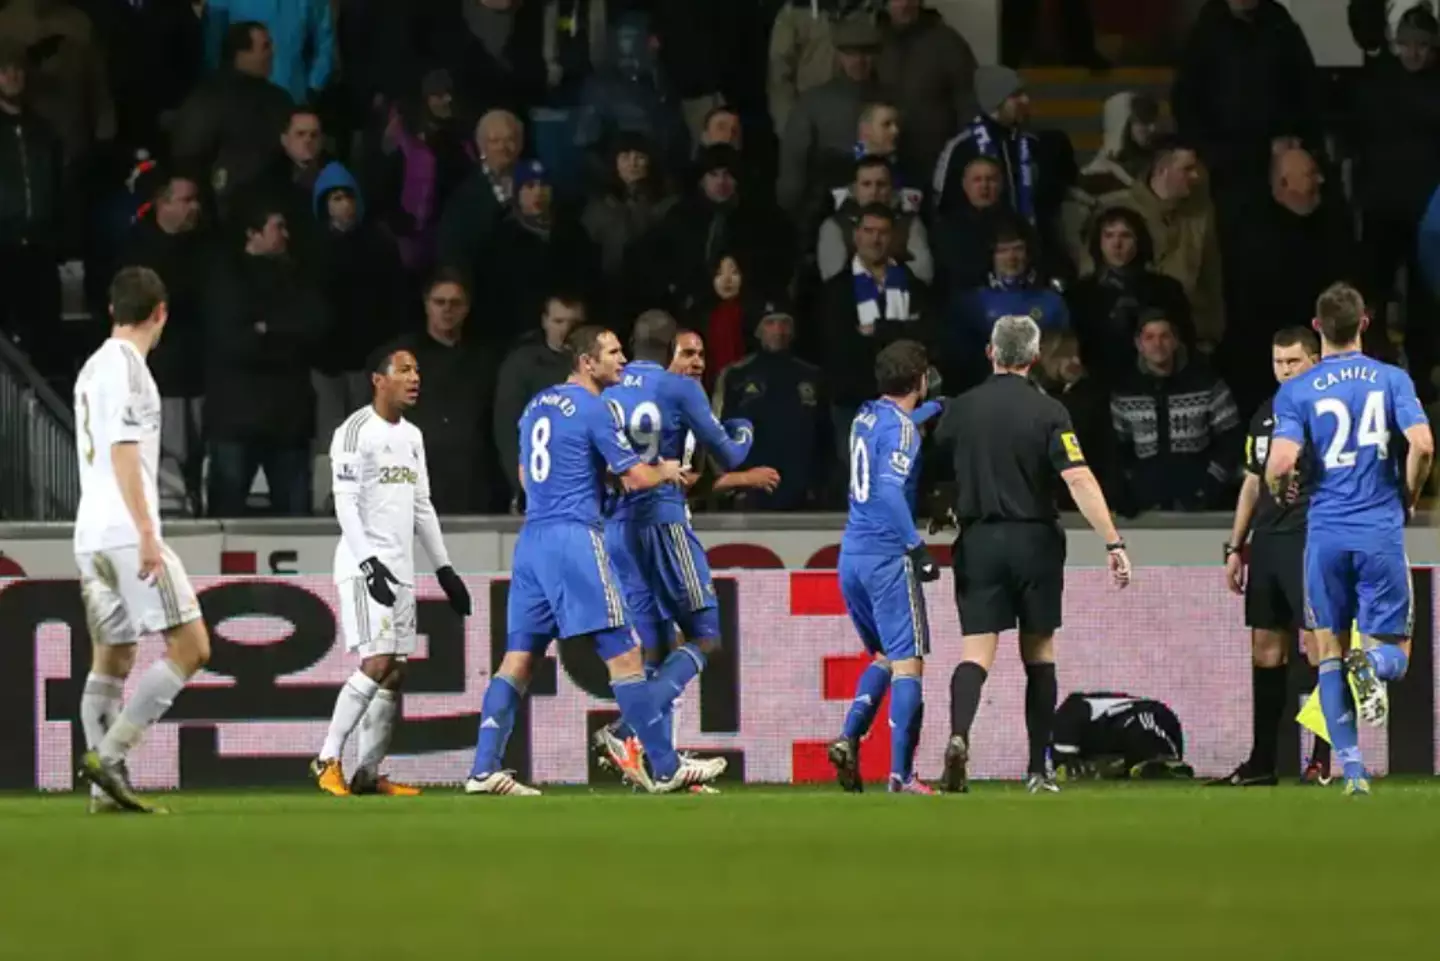 Charlie Morgan was kicked by Eden Hazard back in 2013 when supporting Swansea as a ball boy.